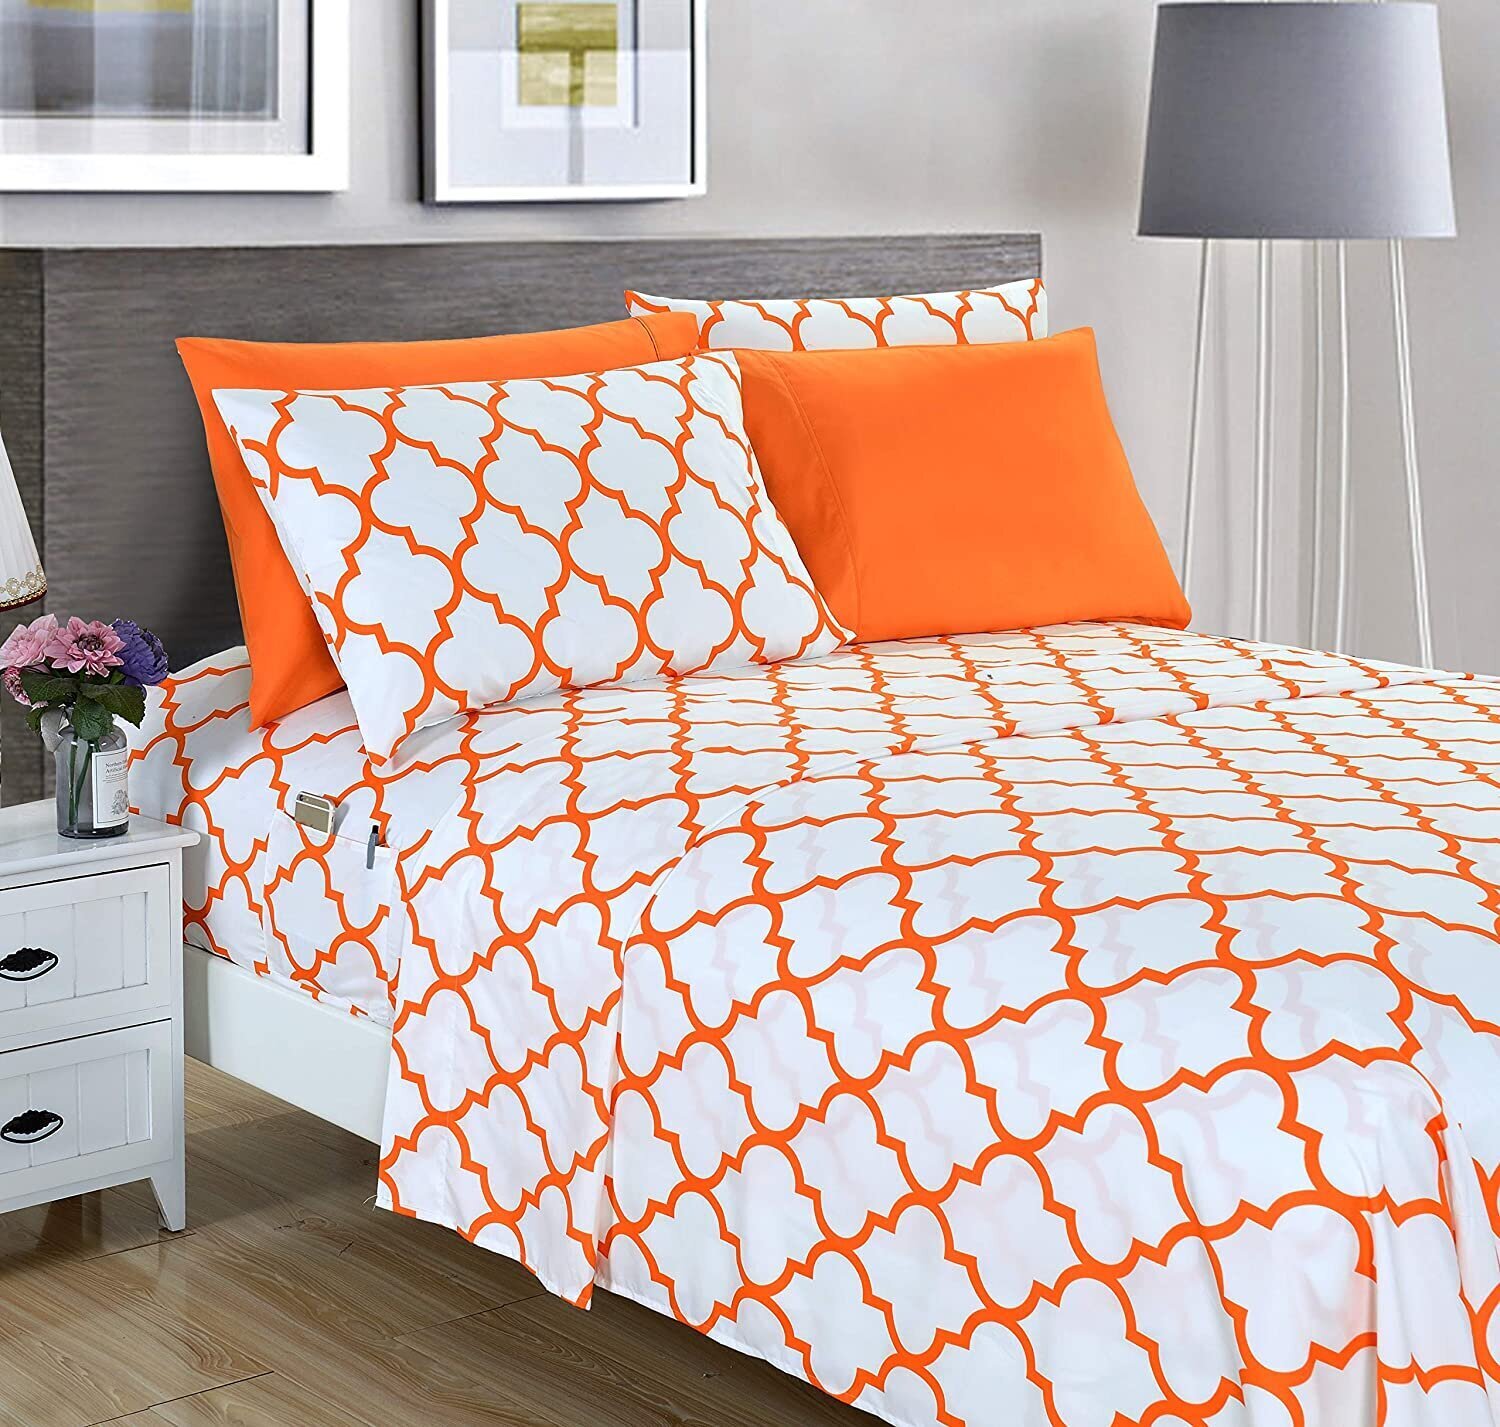 Bright geometric bed sheets